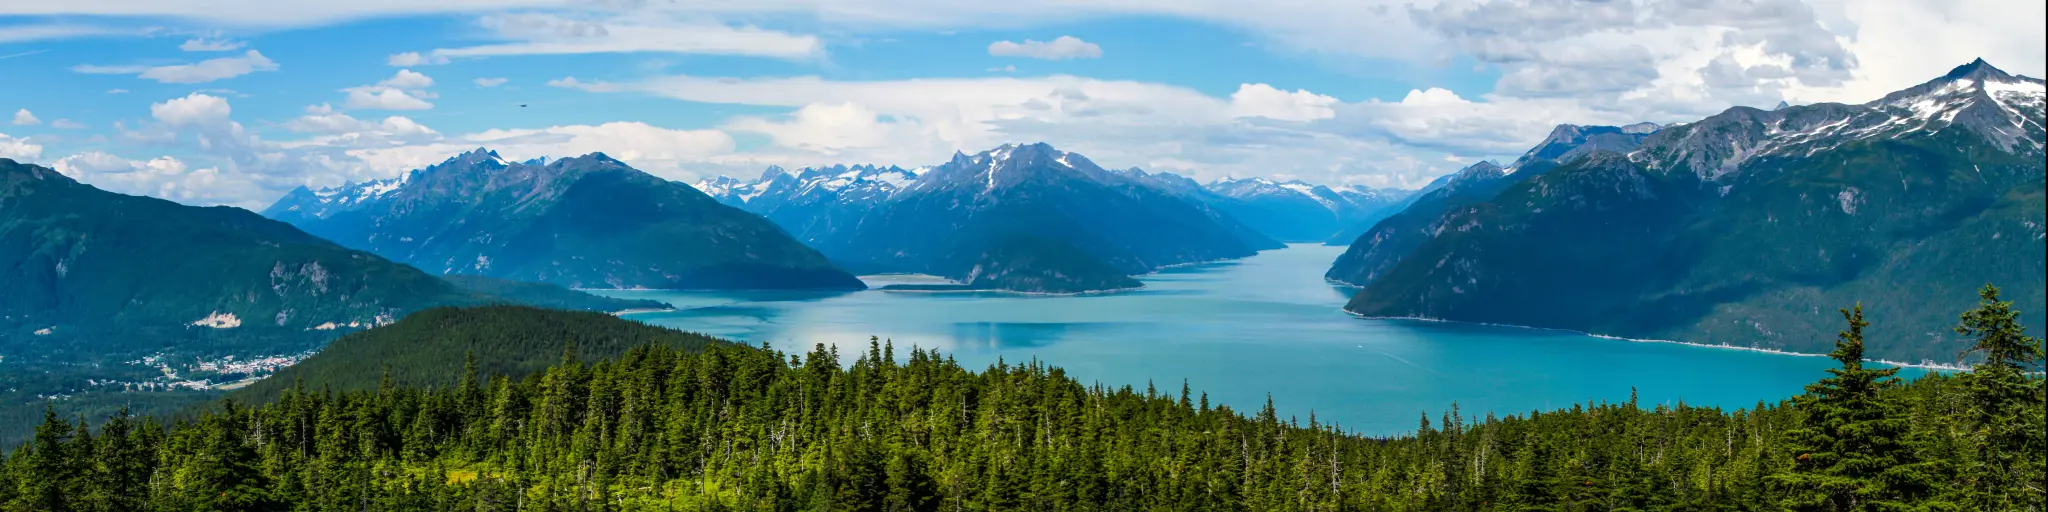 Haines, Alaska surrounded by snow-capped mountains and ocean inlets on a summer day.